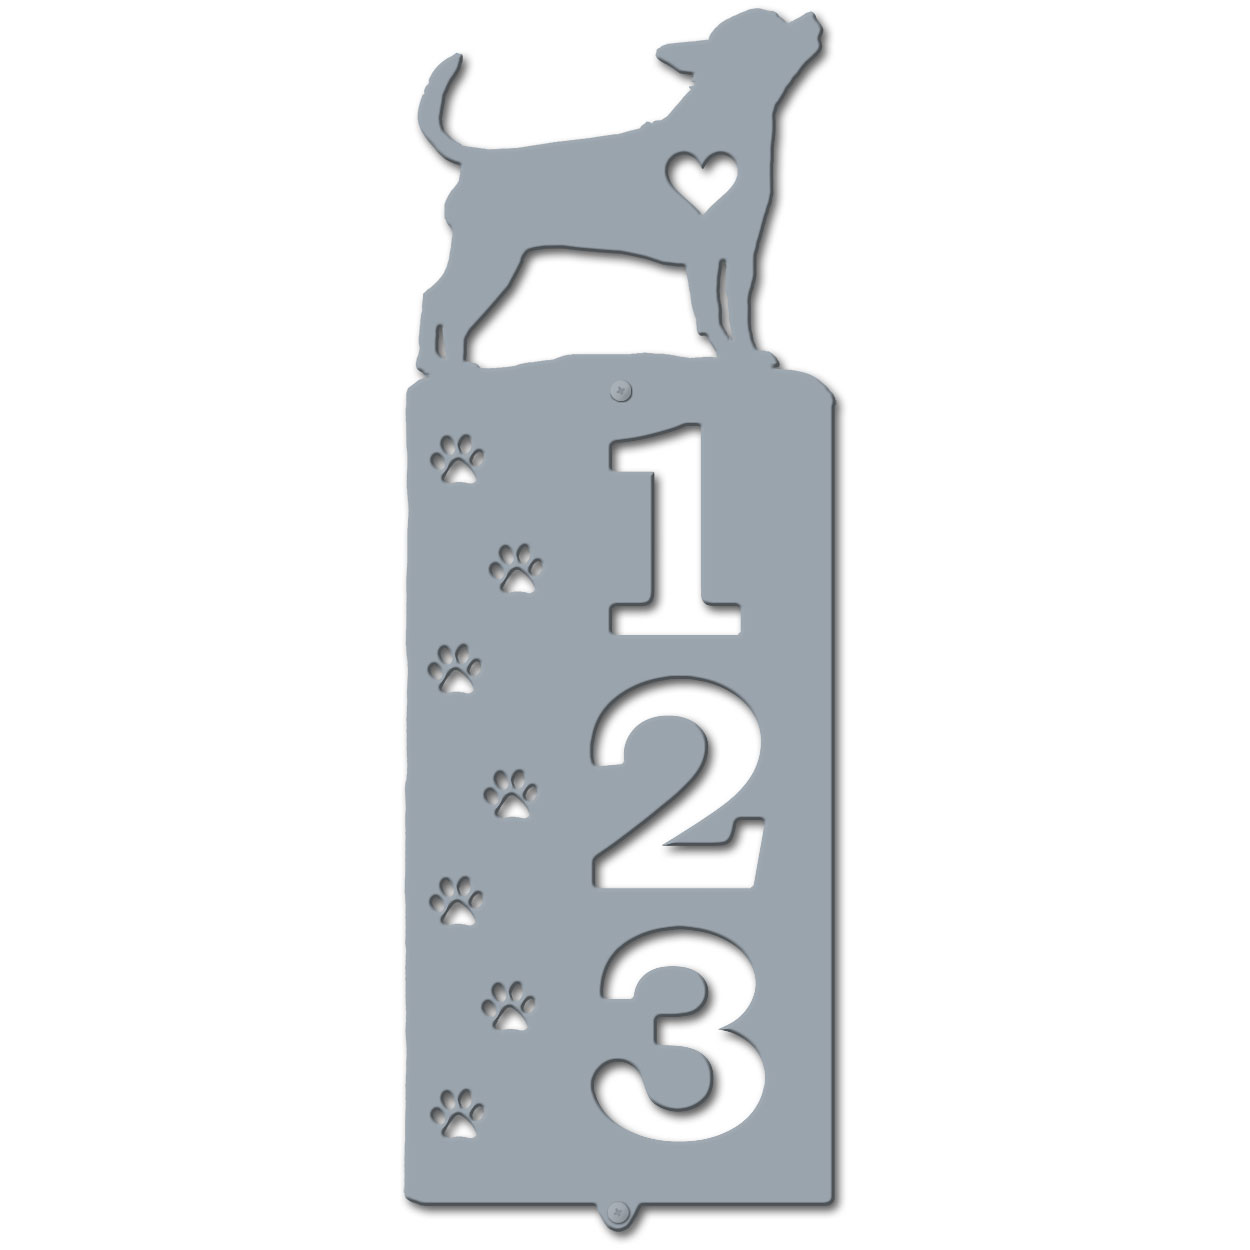 636173 - Chihuahua Cut Outs Three Digit Address Number Plaque